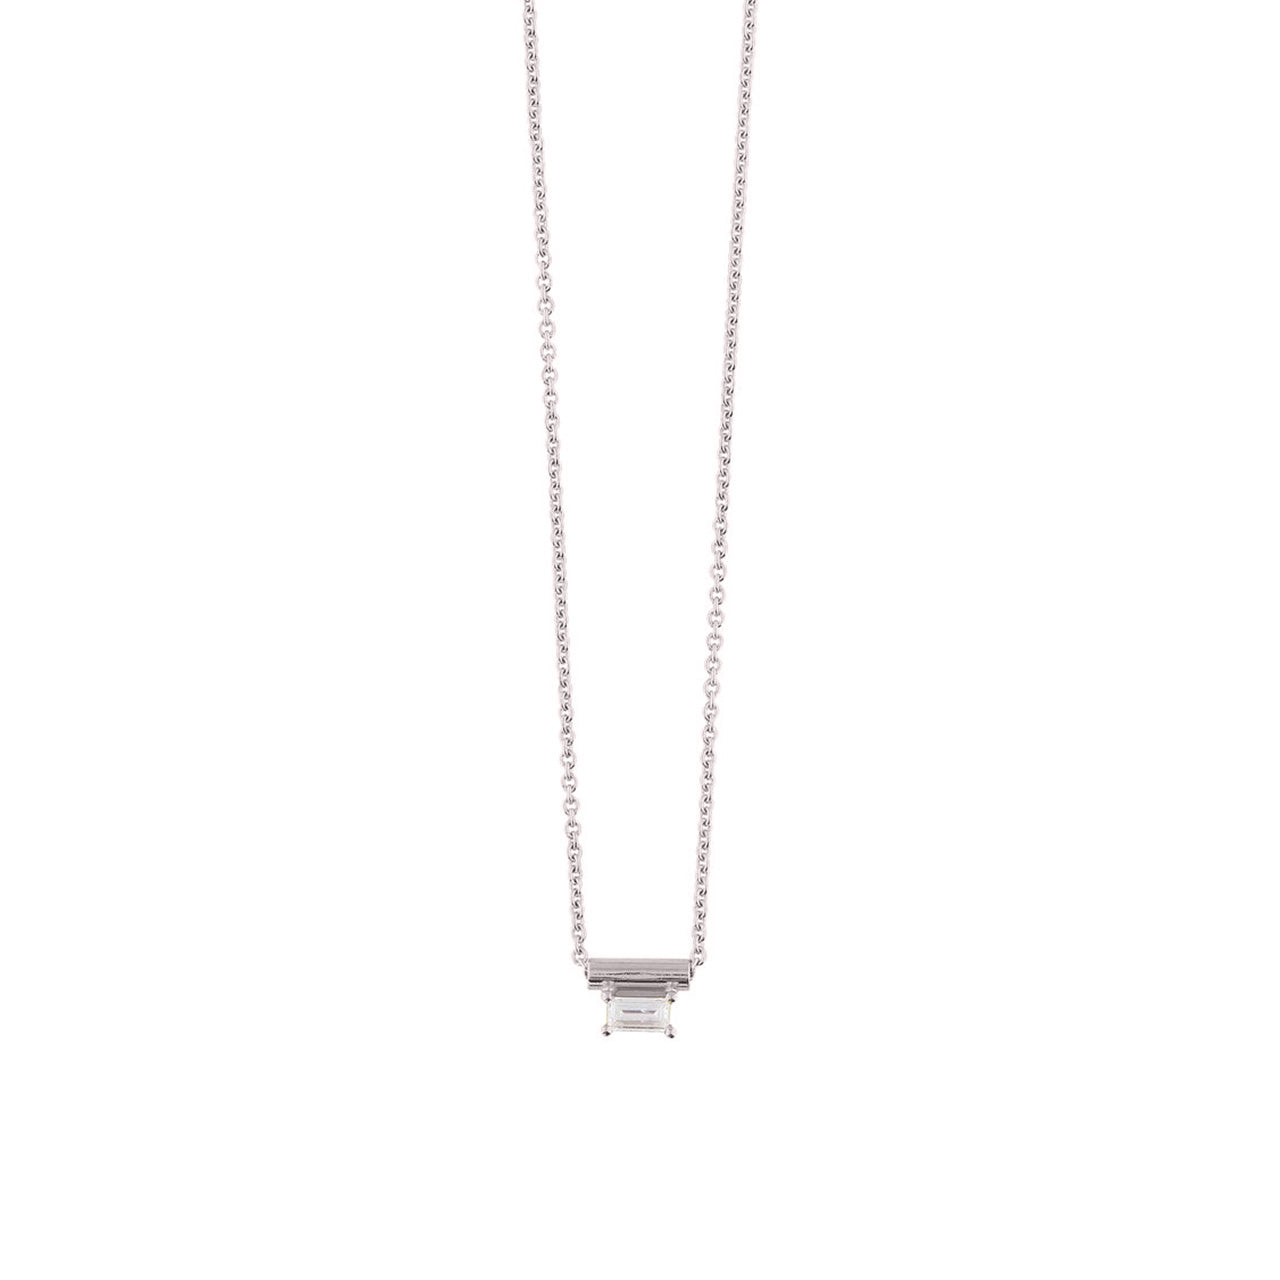 18 carat white gold nora necklace